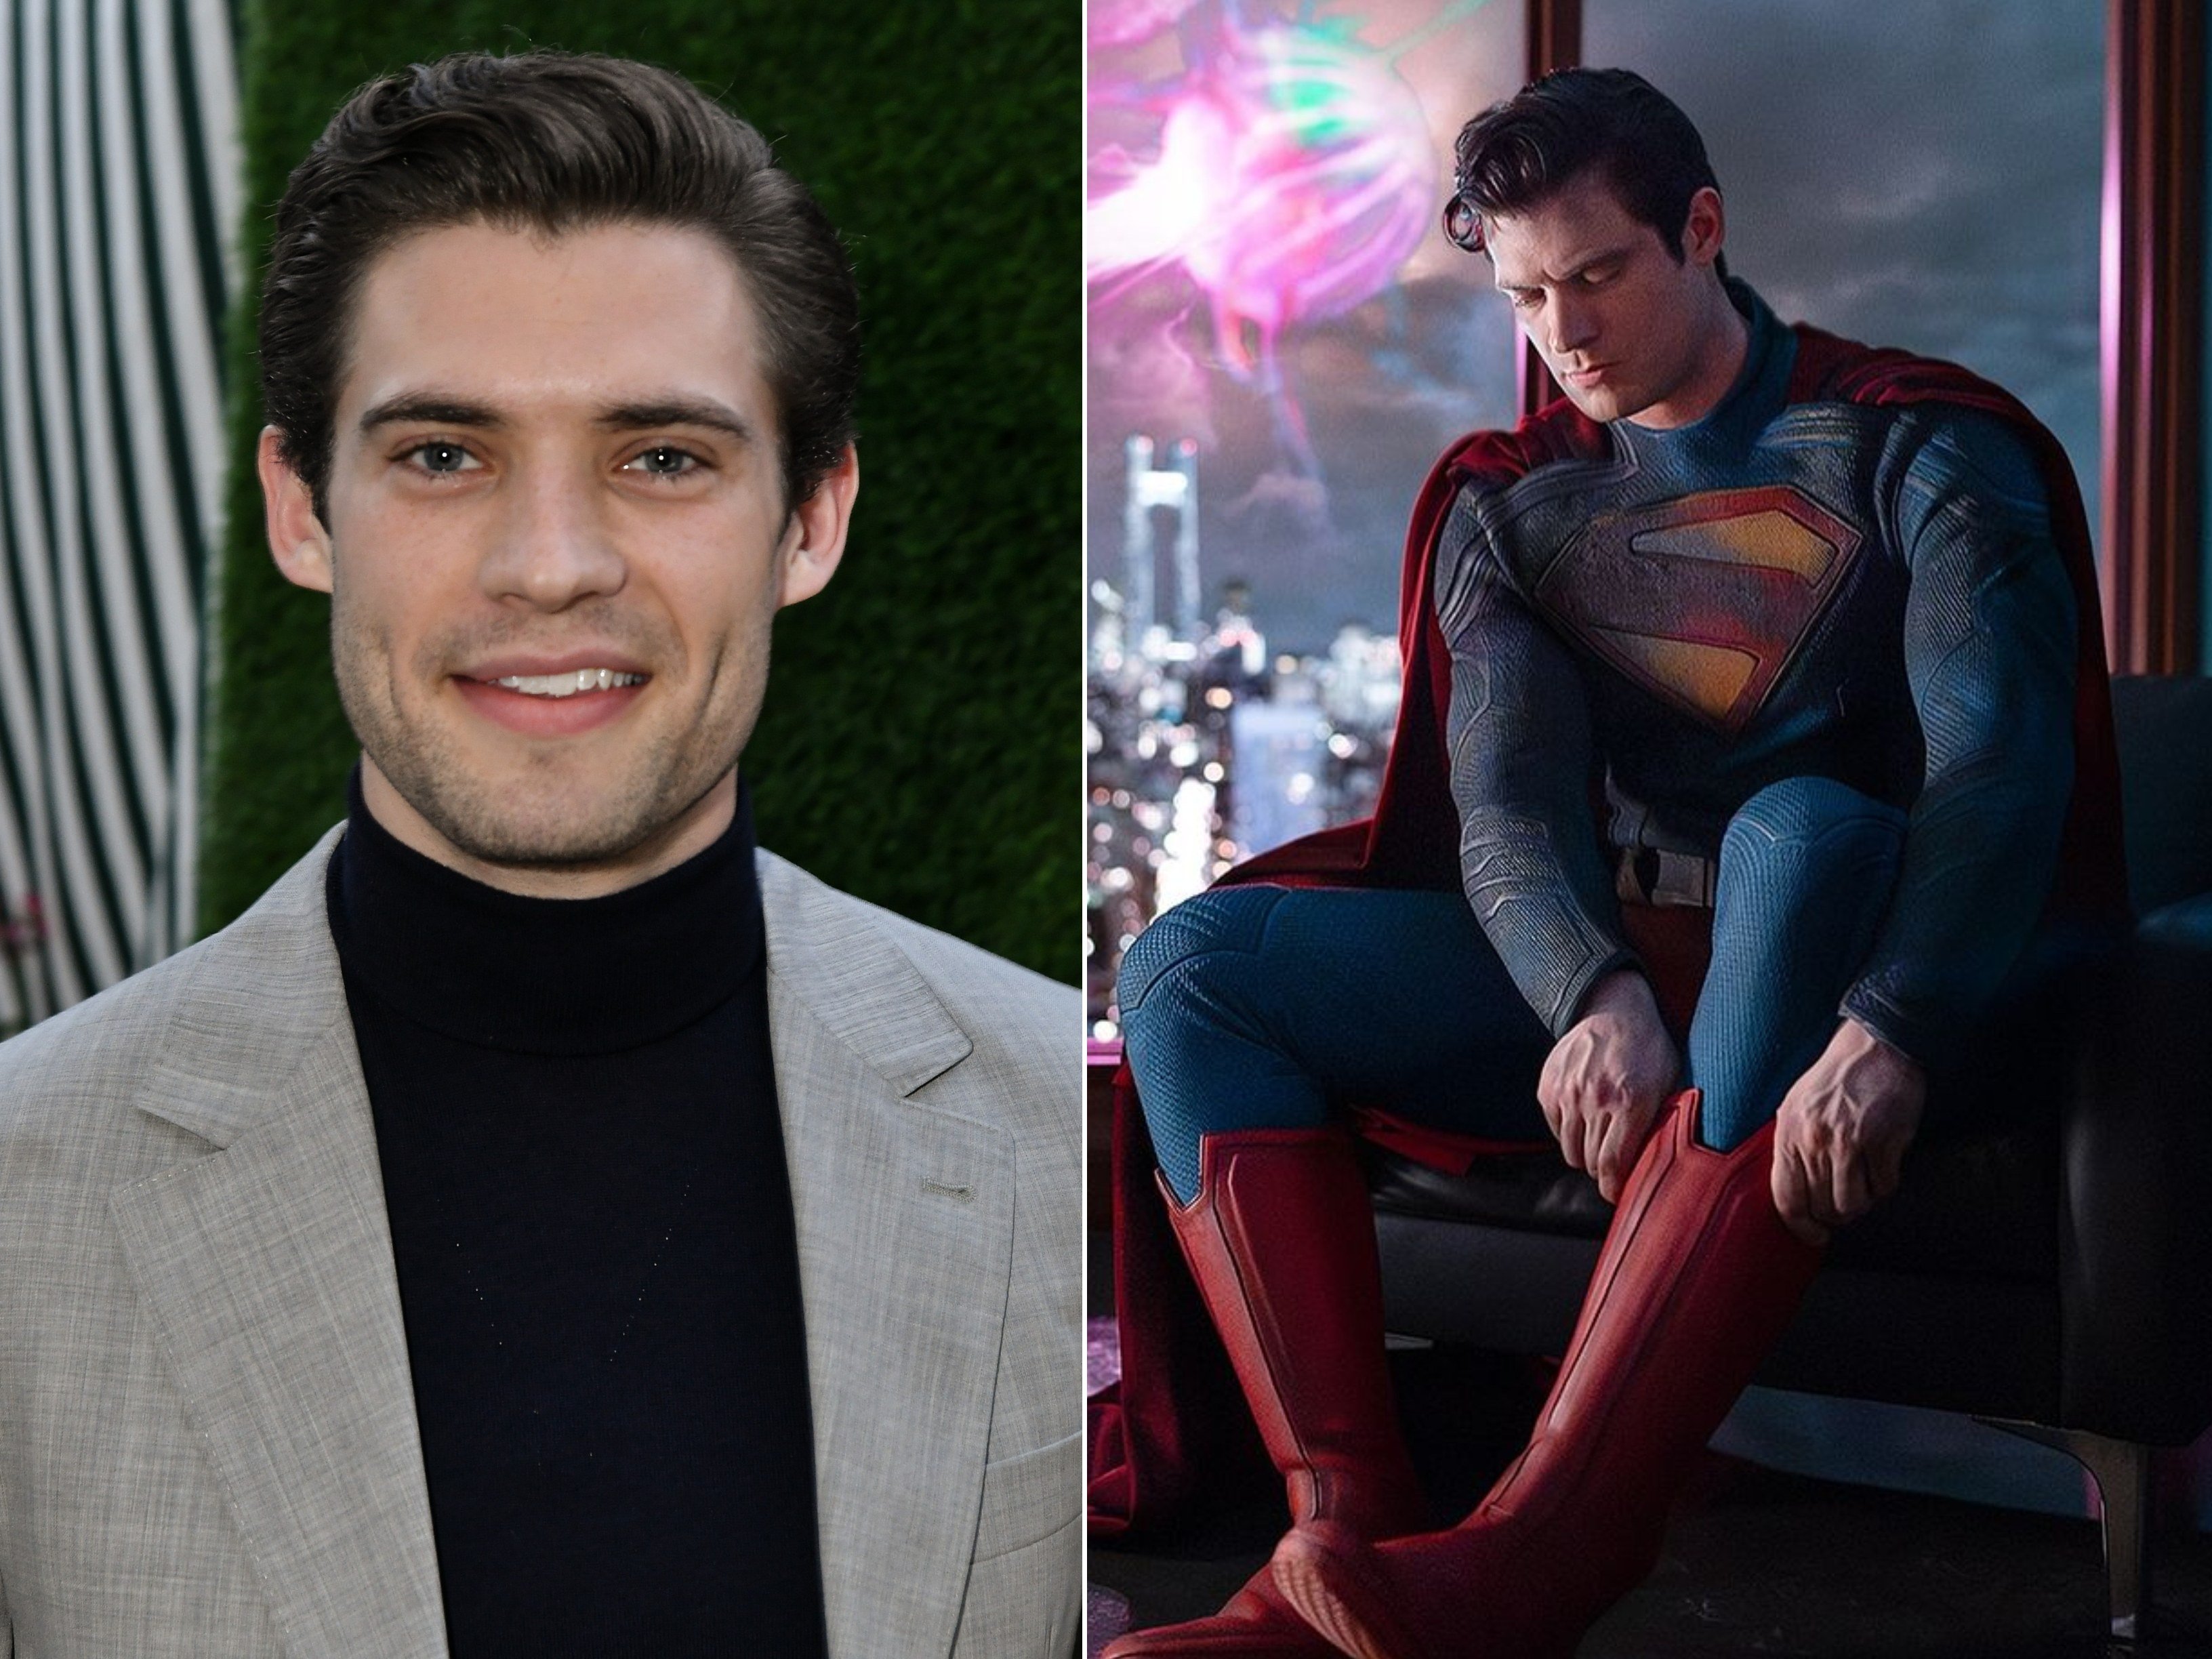 David Corenswet dreamed of one day playing Superman, and will be the first Jewish actor in the role ... but what is his kryptonite? Photos: Getty Images, @jamesgunn/Instagram